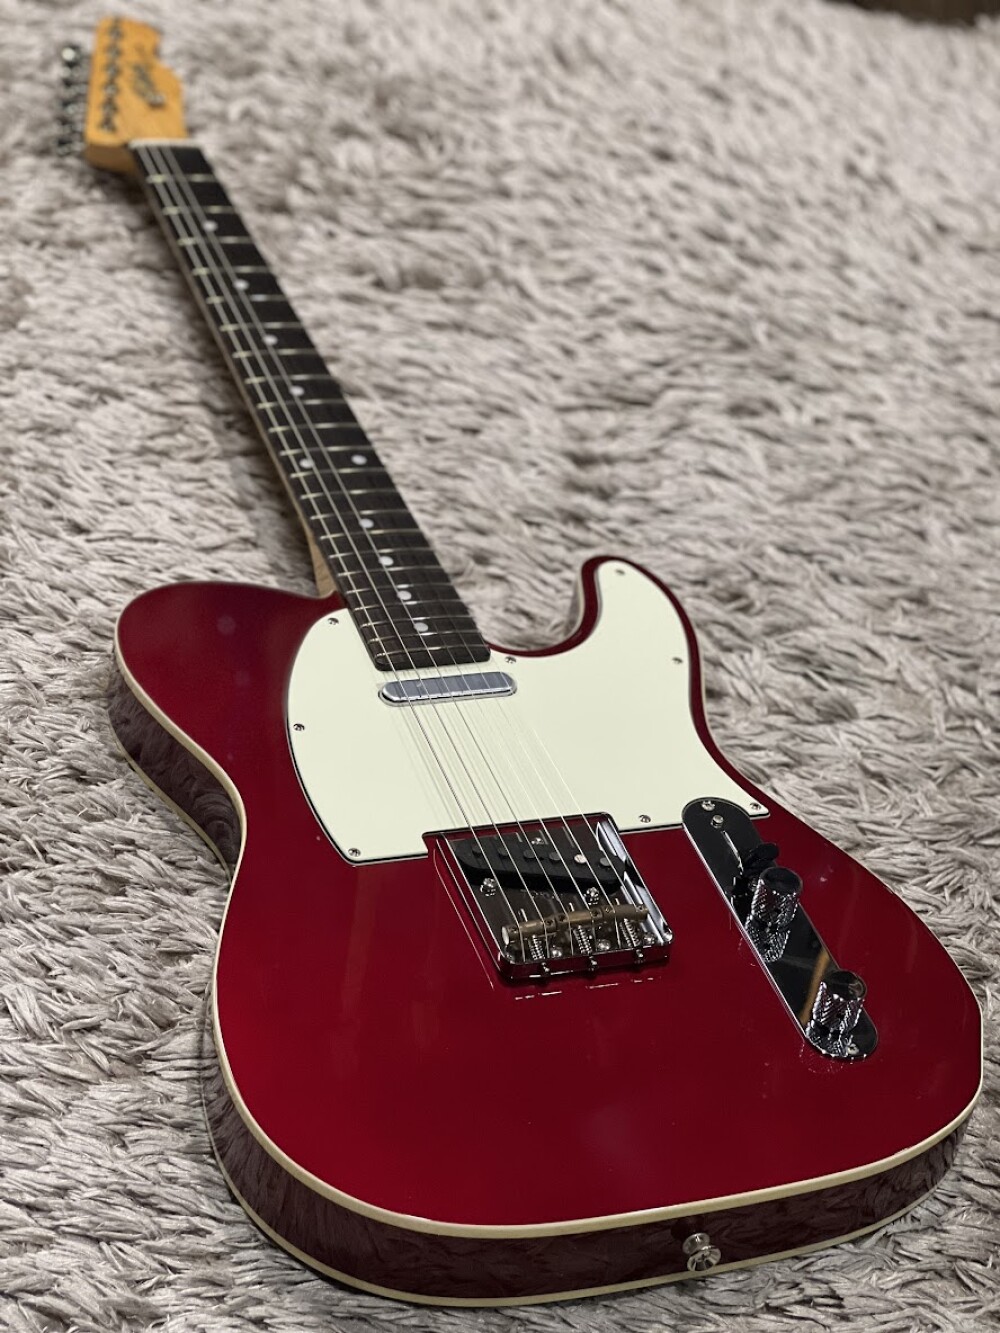 Tokai ATE-106B OCR/R Breezysound Japan in Old Candy Apple Red